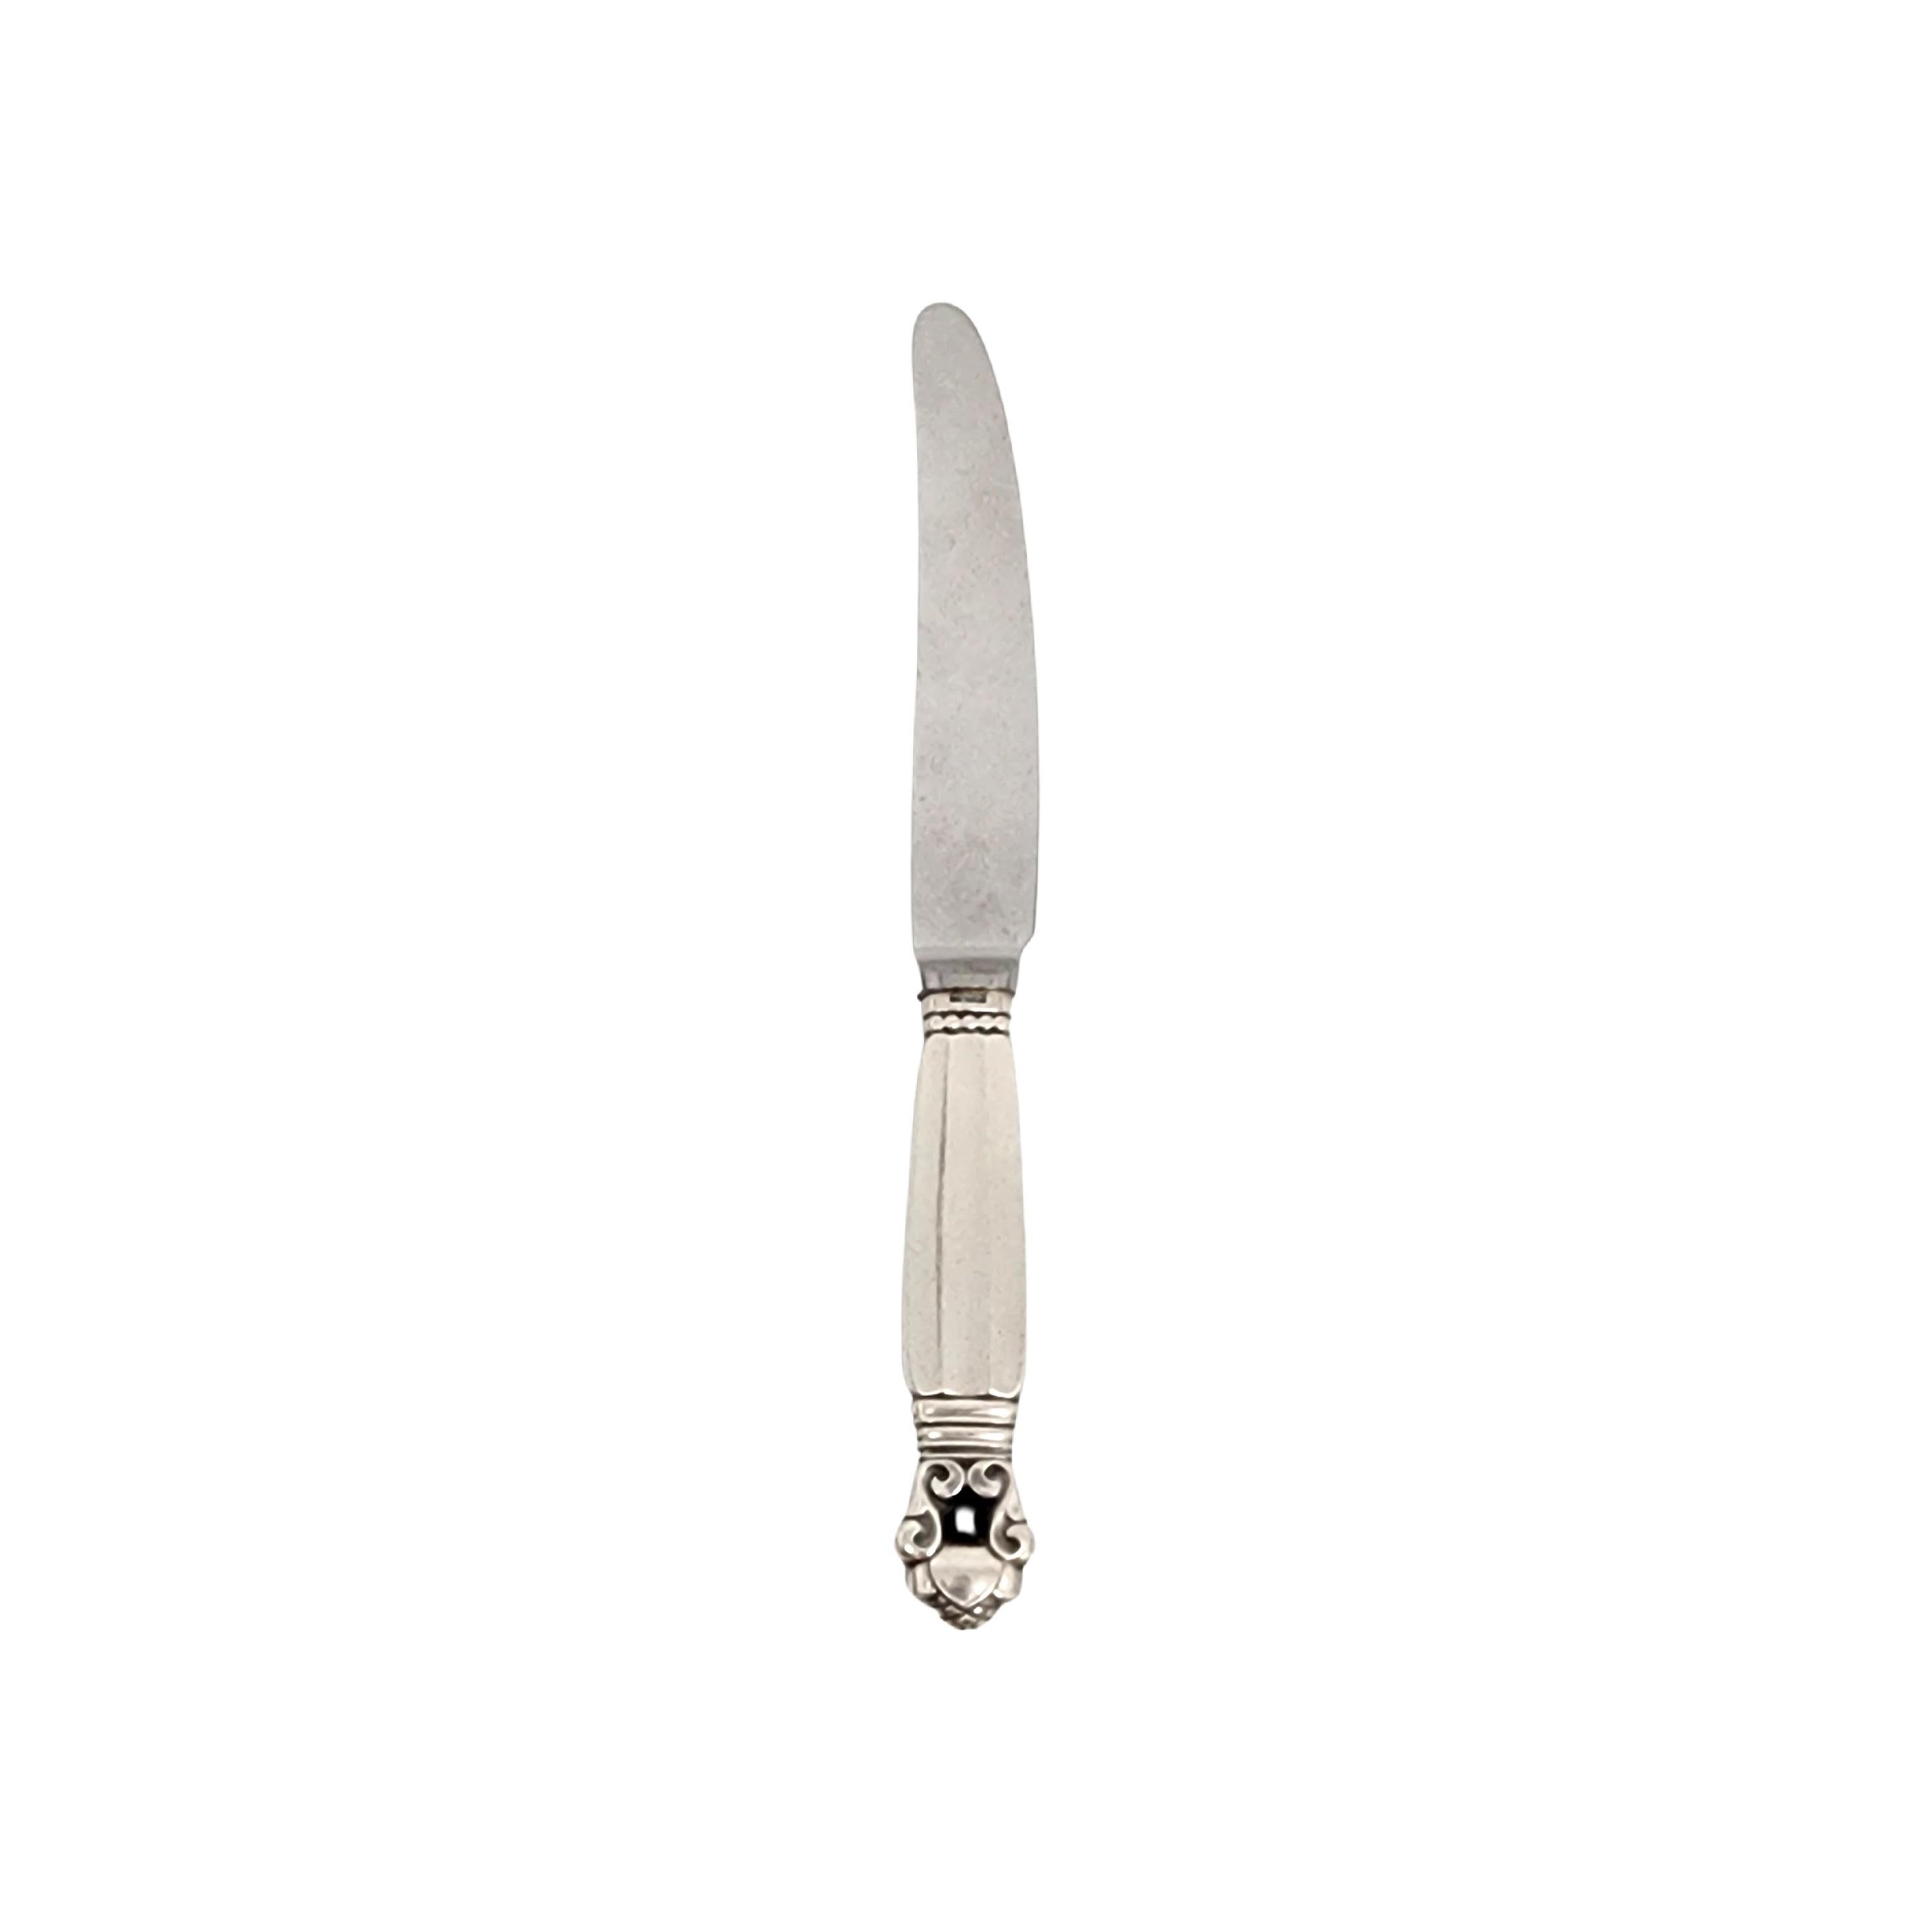 Sterling silver handle fruit knife in the Acorn pattern by Georg Jensen.

The Acorn pattern was introduced in 1915 as a collaboration between Georg Jensen and designer Johan Ronde. The Acorn pattern, which combines Art Nouveau and Art Deco styles,